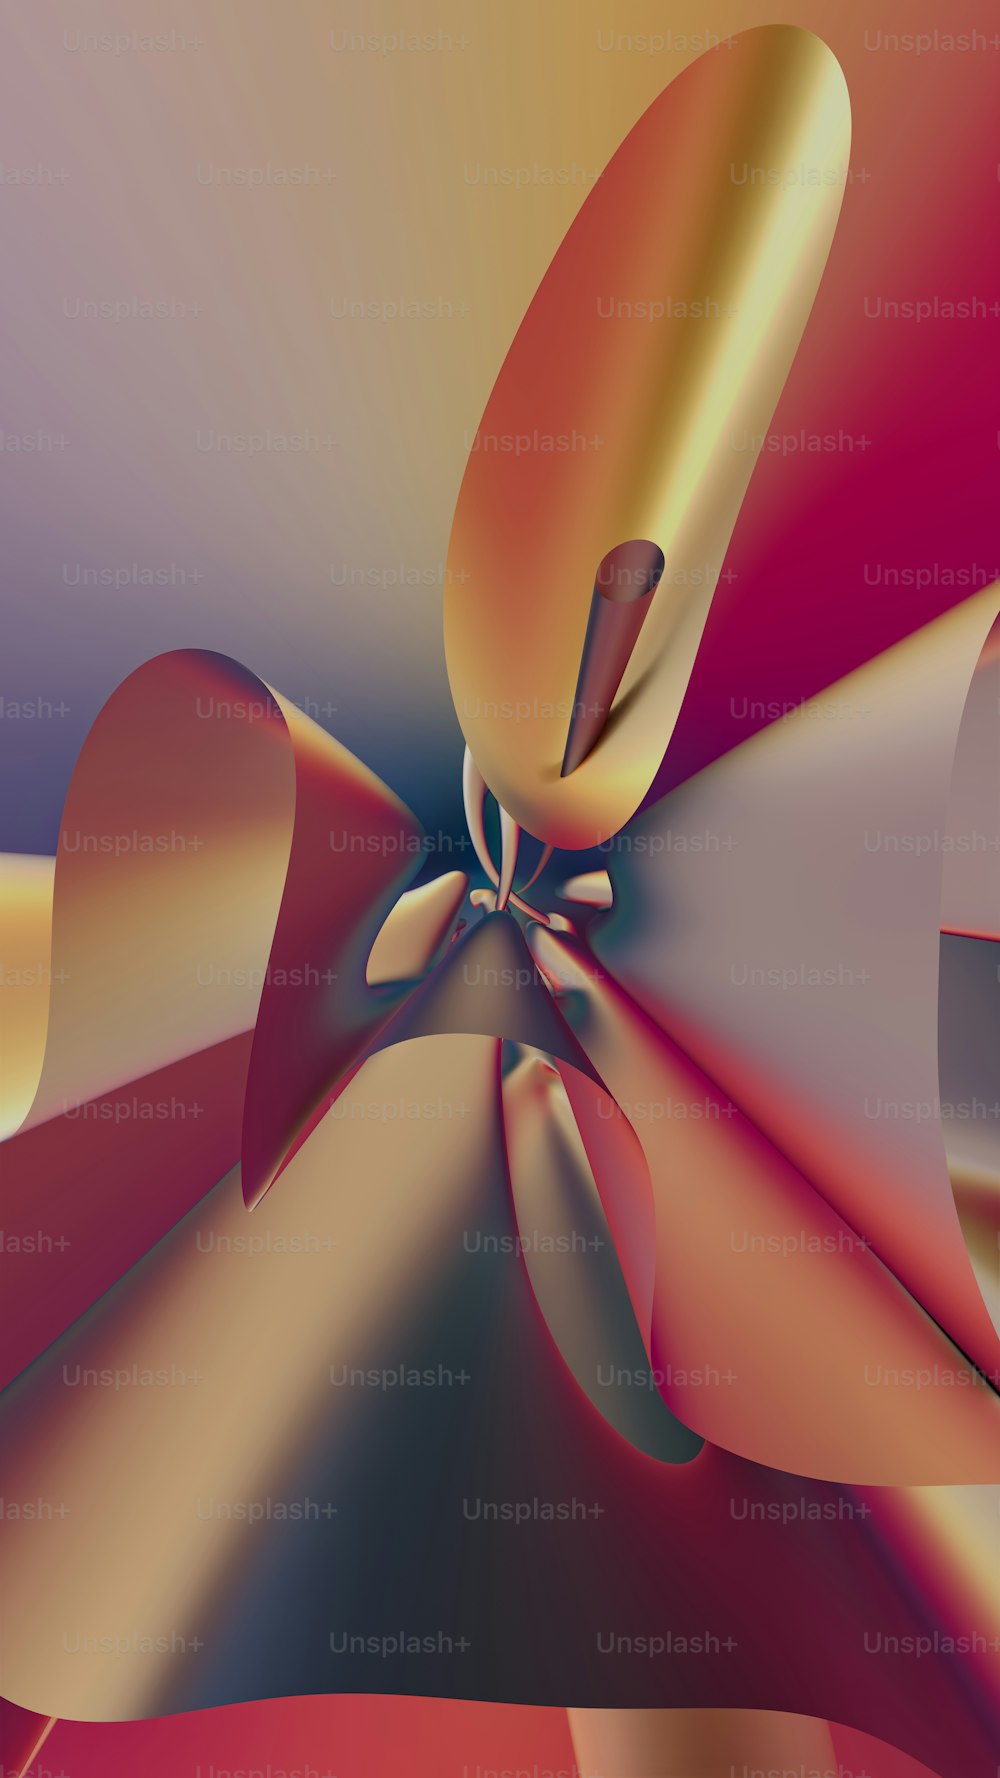 a computer generated image of an abstract flower